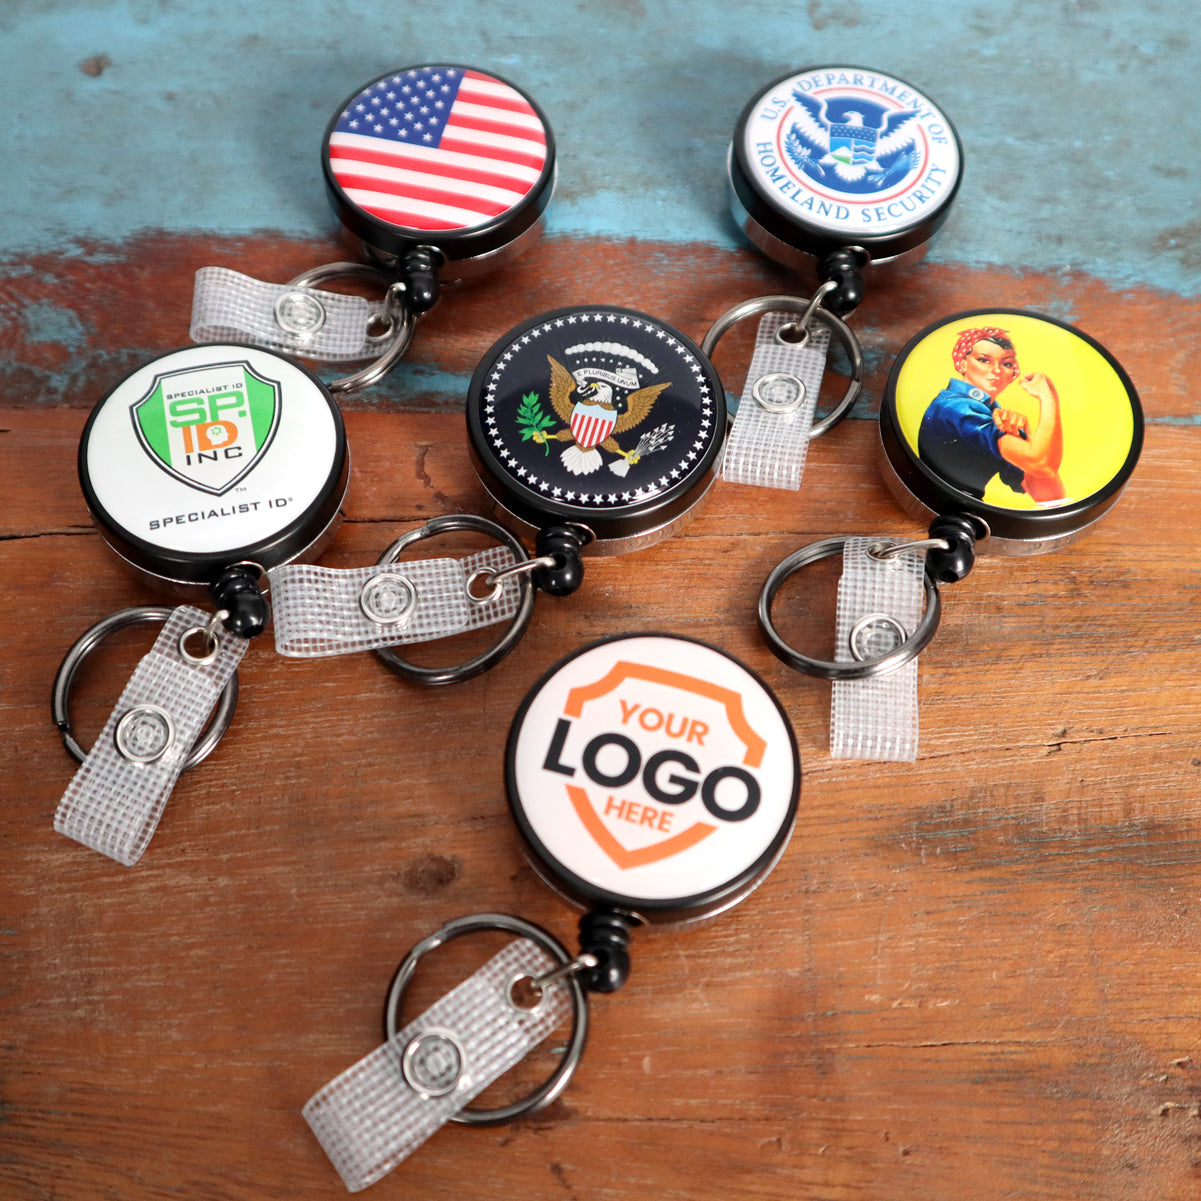 Five Custom Heavy Duty Badge Reels with Key Ring and Badge Strap (SPID-3180) - Add Your Logo with different designs, including the American flag, the Department of Homeland Security emblem, a badge with the U.S. presidential seal, "Your Logo Here," and Rosie the Riveter. Each holder features a custom heavy-duty metal badge reel and key ring for personalized identification display.